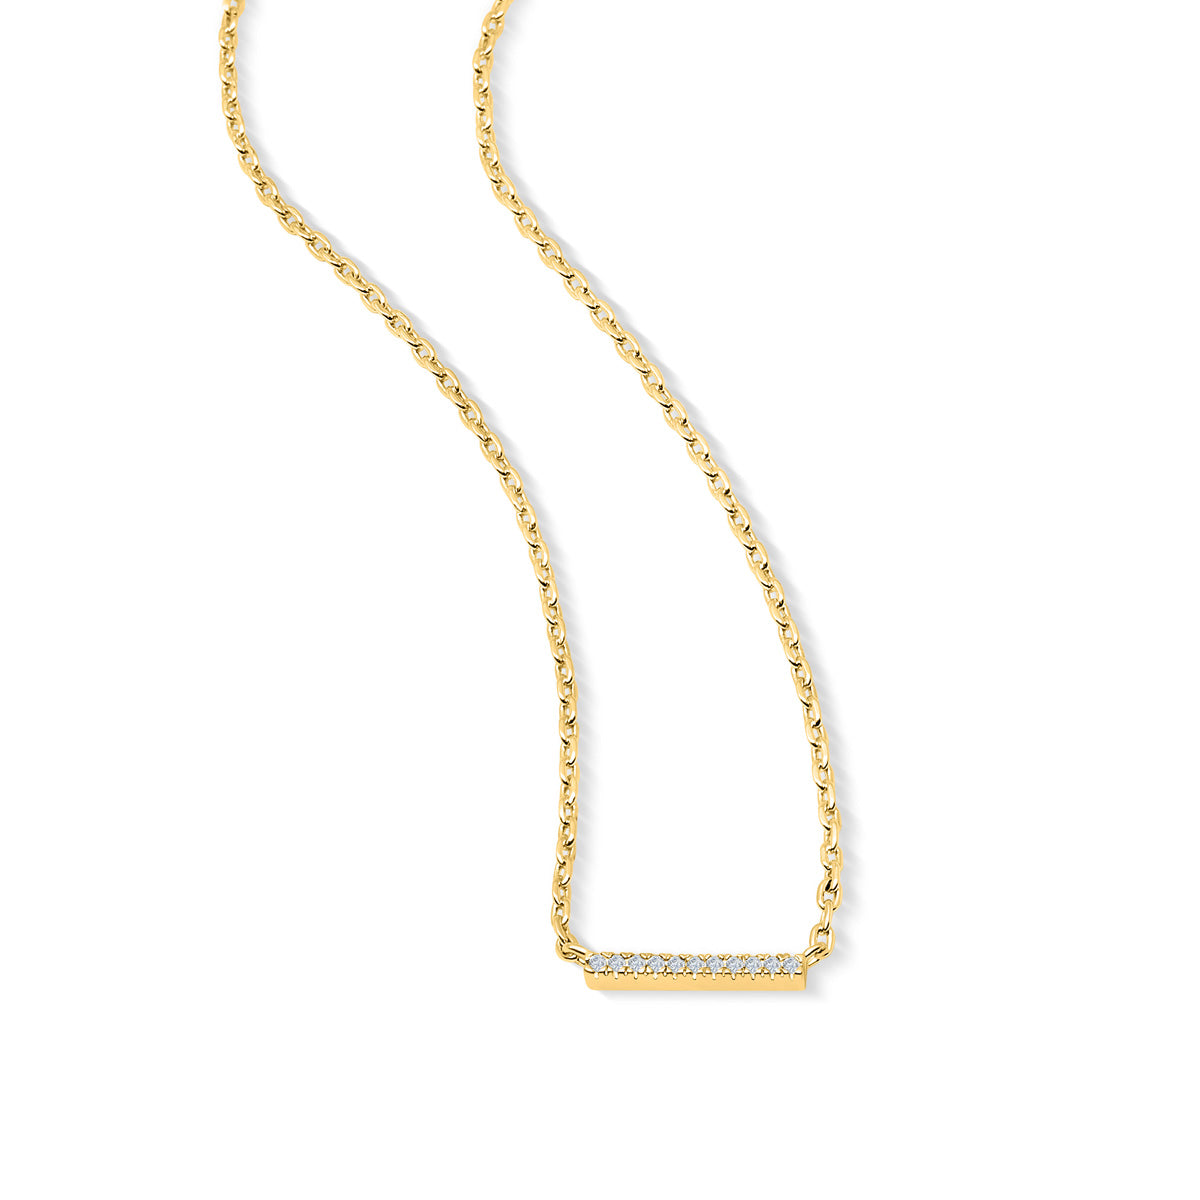 Gold plated bar chain necklace